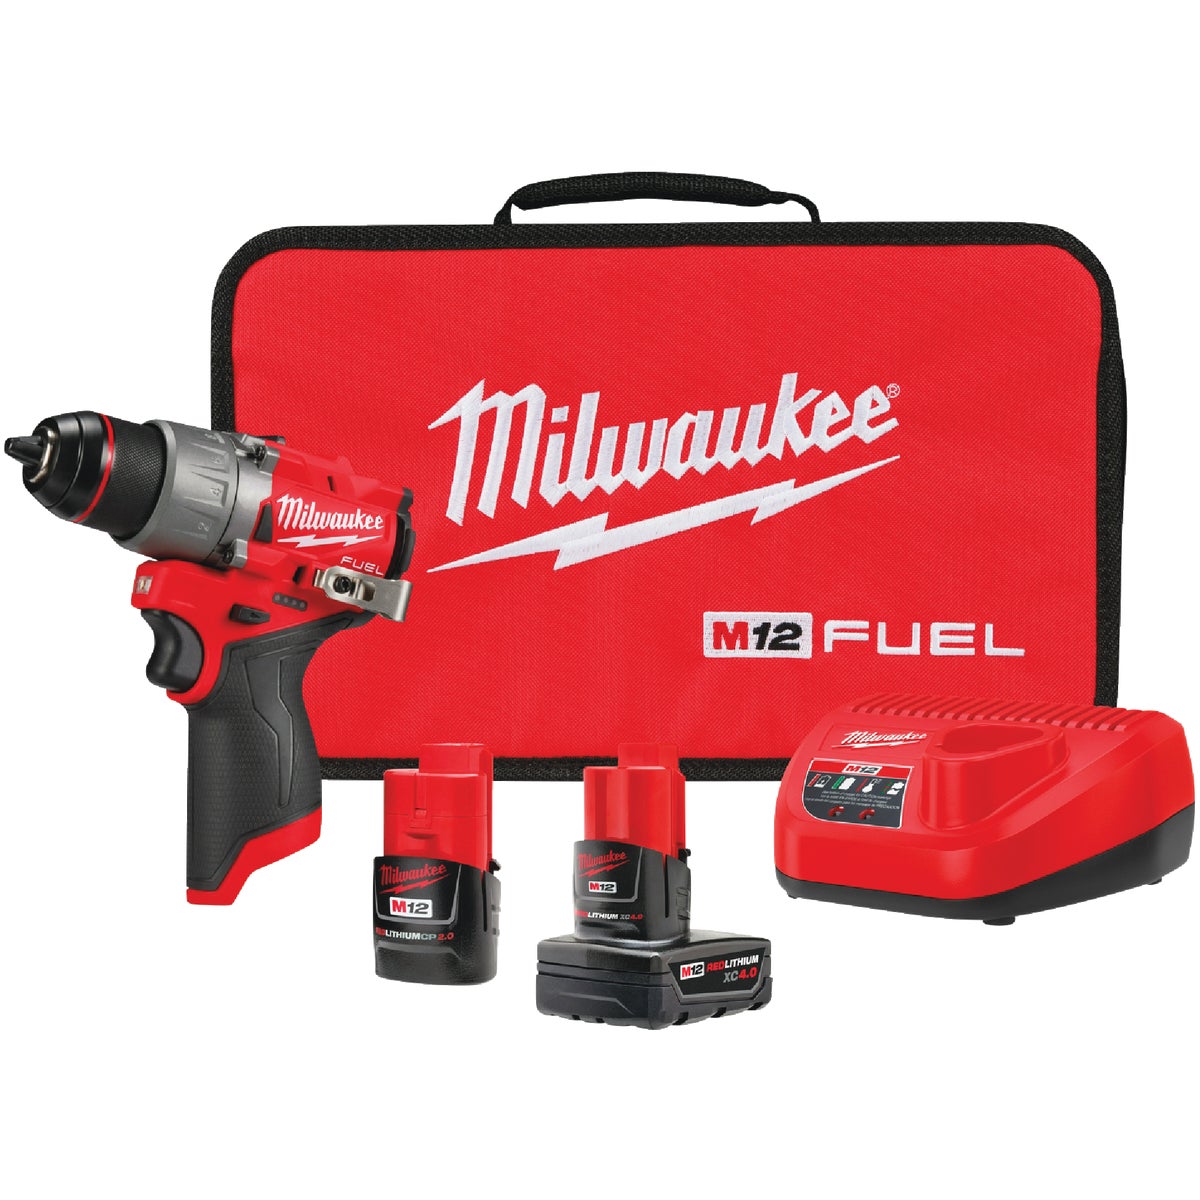 Milwaukee M12 FUEL Brushless 1/2 In. Subcompact Cordless Drill/Driver Kit